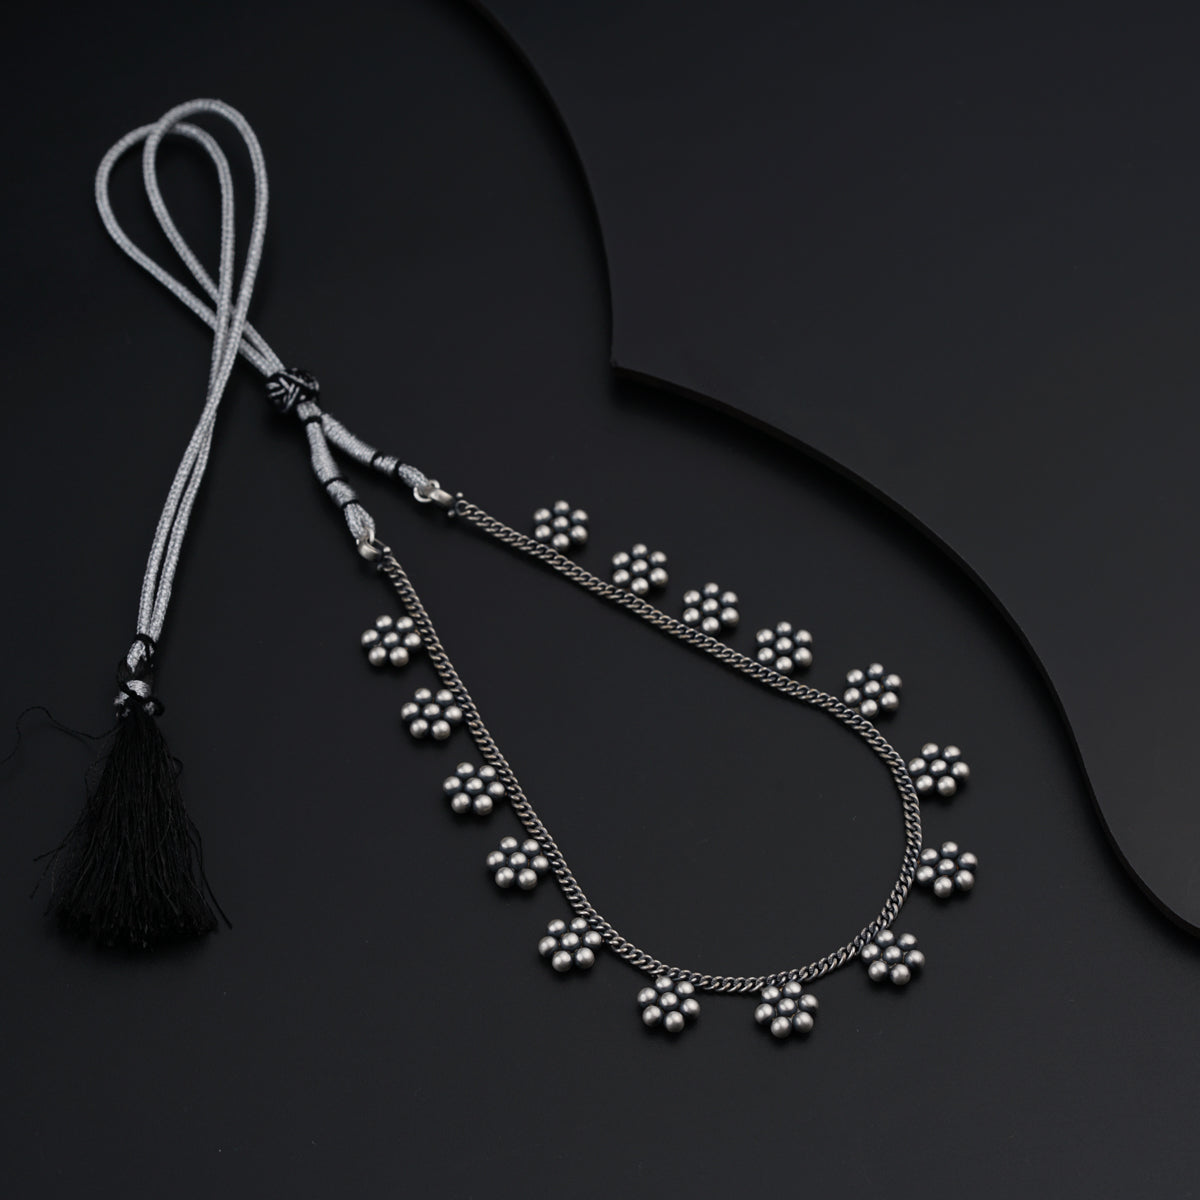 a black and white photo of a tasseled necklace